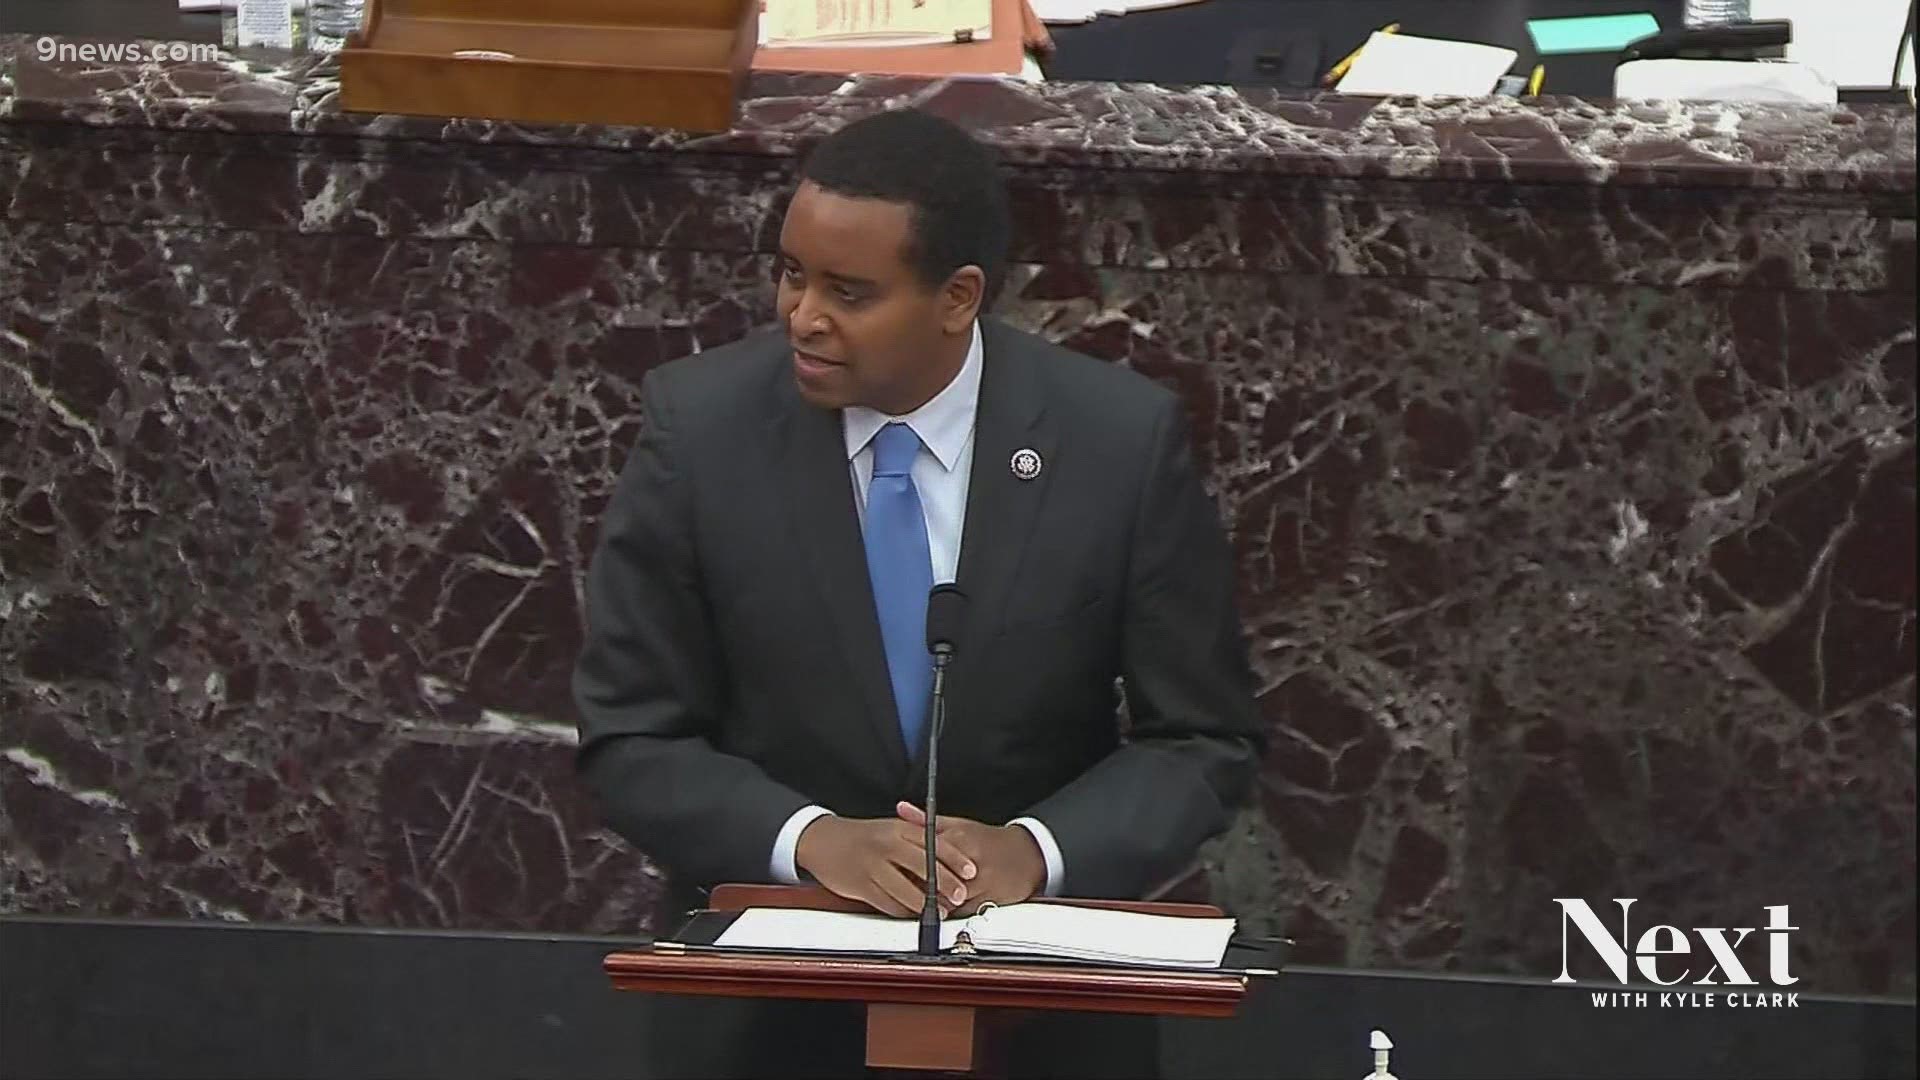 Colorado U.S. Rep. Joe Neguse, who is serving as an impeachment manager, told senators that the impeachment trial of former President Trump was constitutional.